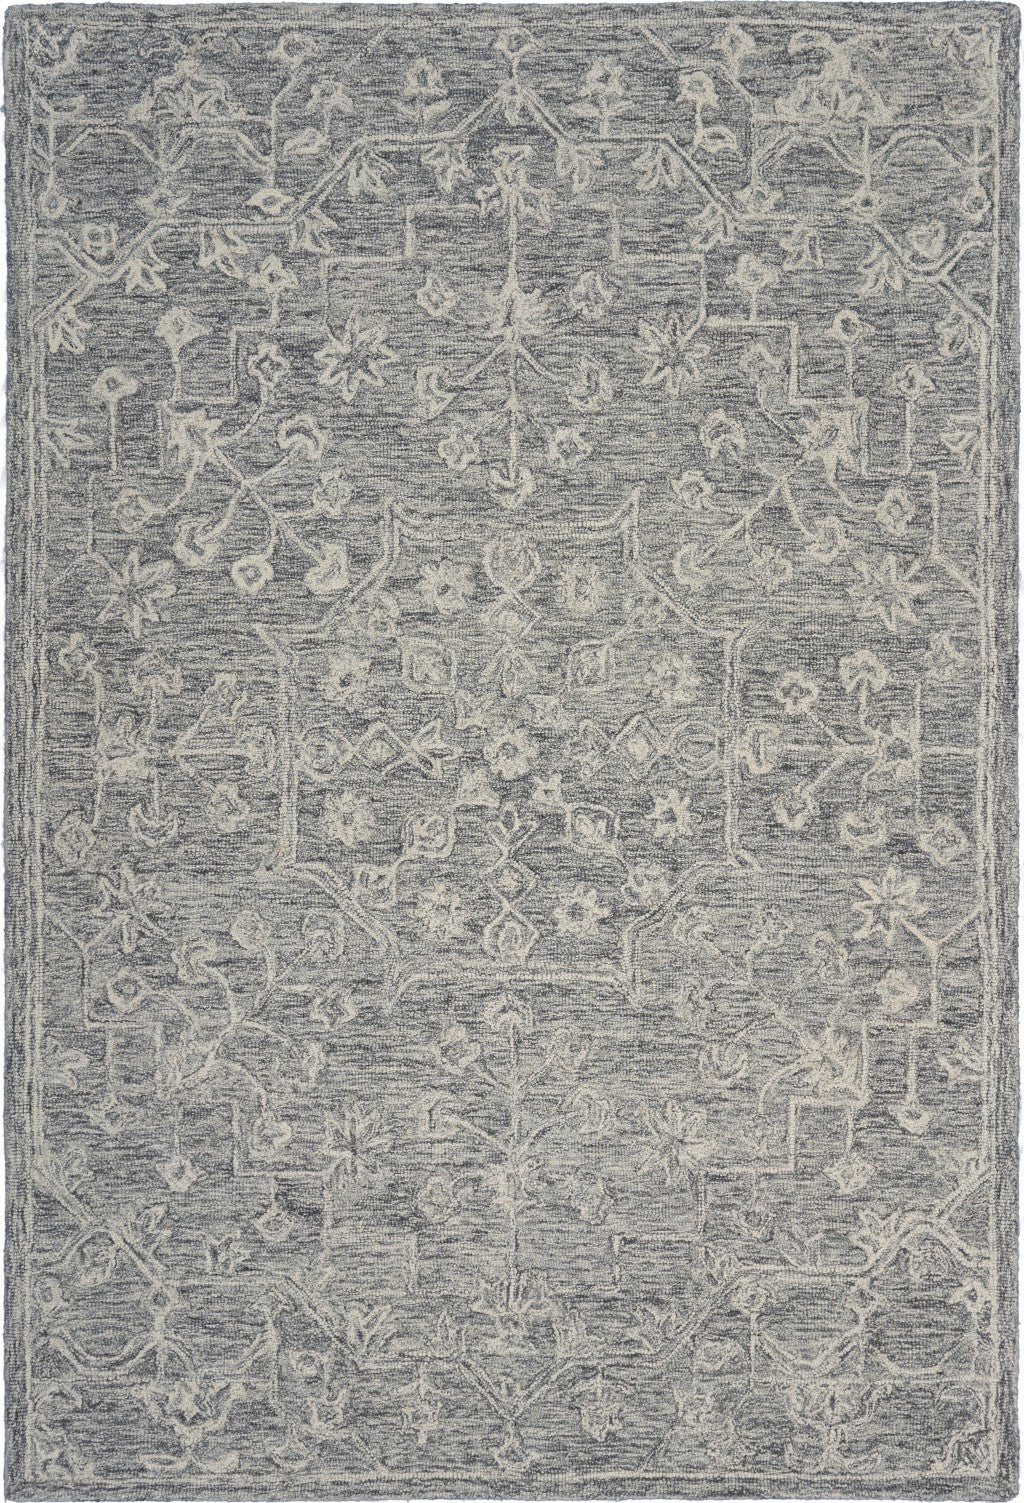 8’ Round Gray Floral Finesse Area Rug